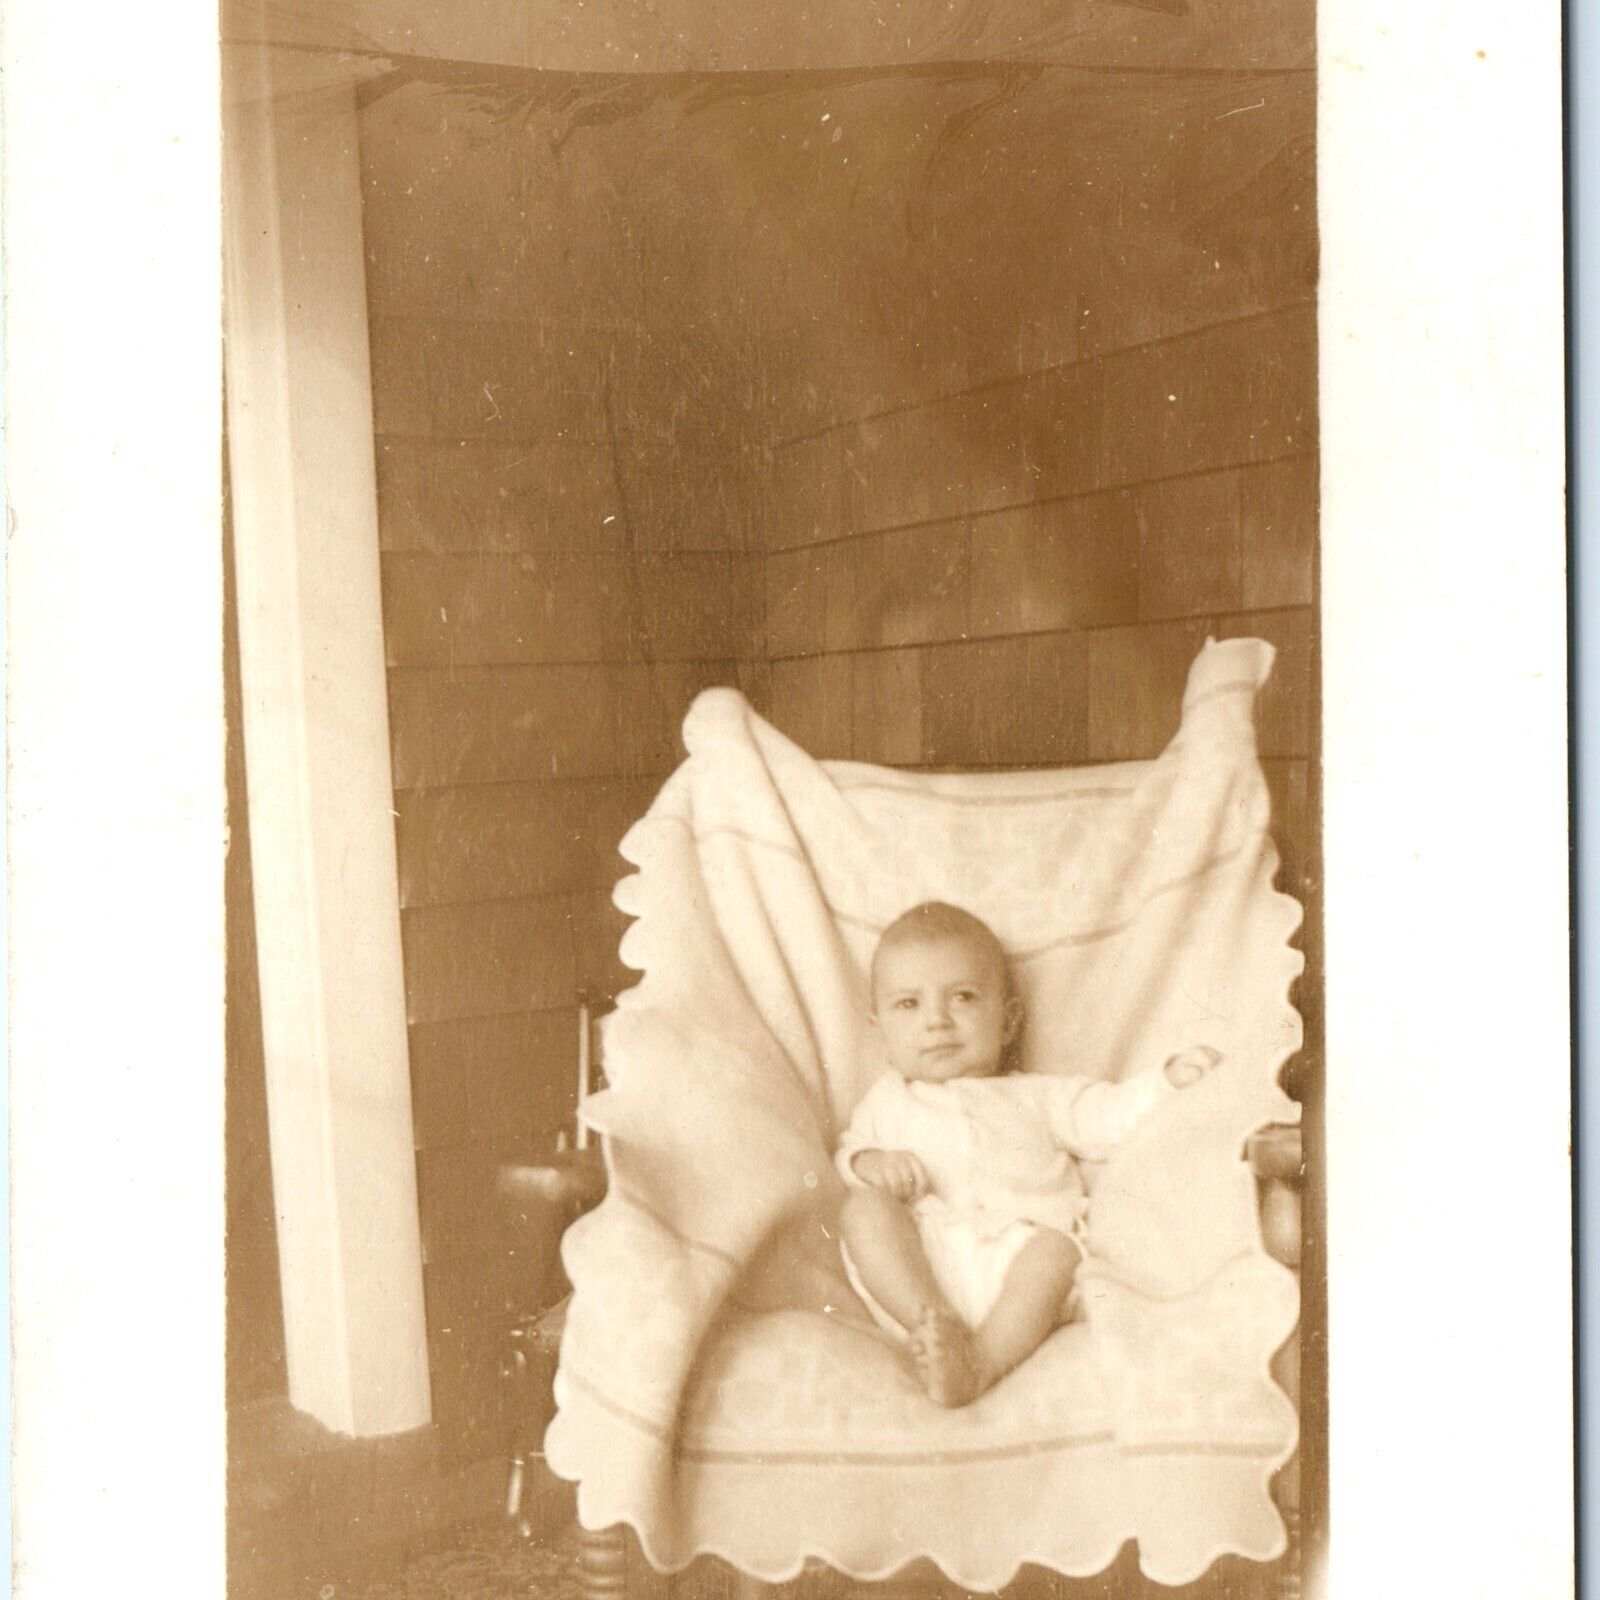 ID'd c1920s 3 Mo Old Baby Boy RPPC Real Photo Postcard John Winfred Barbour A122